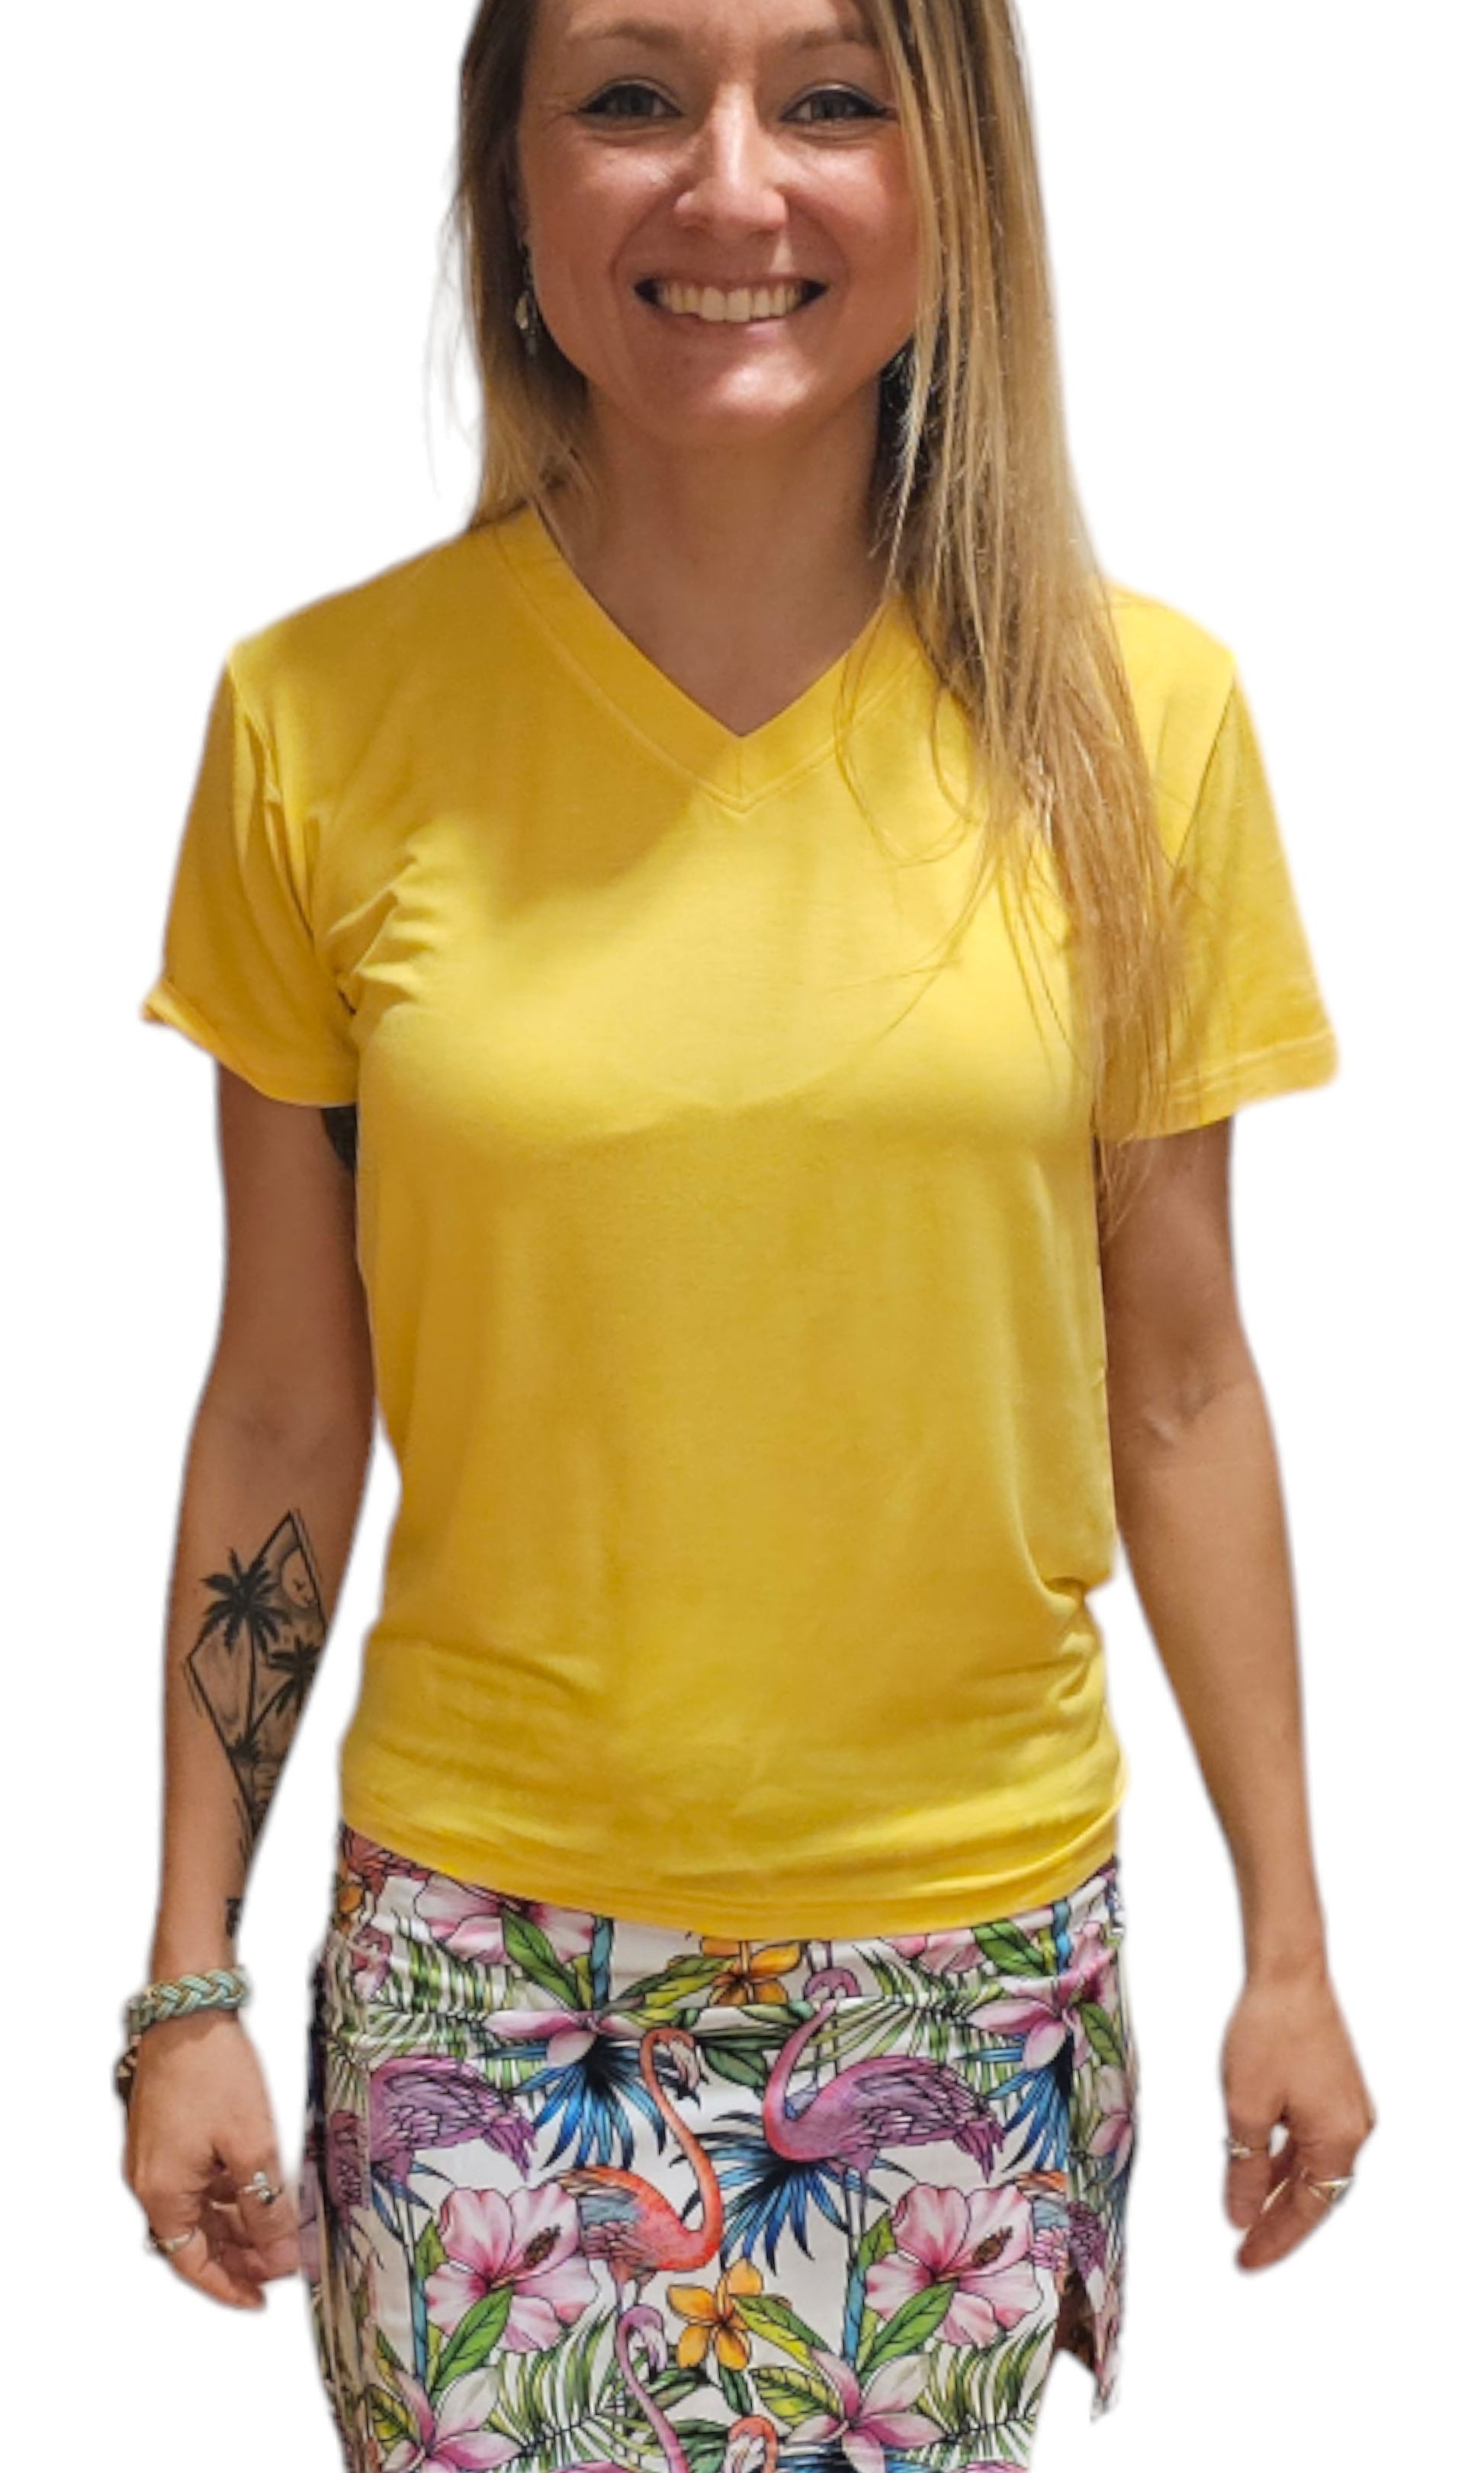 a woman wearing a yellow shirt and floral print skirt